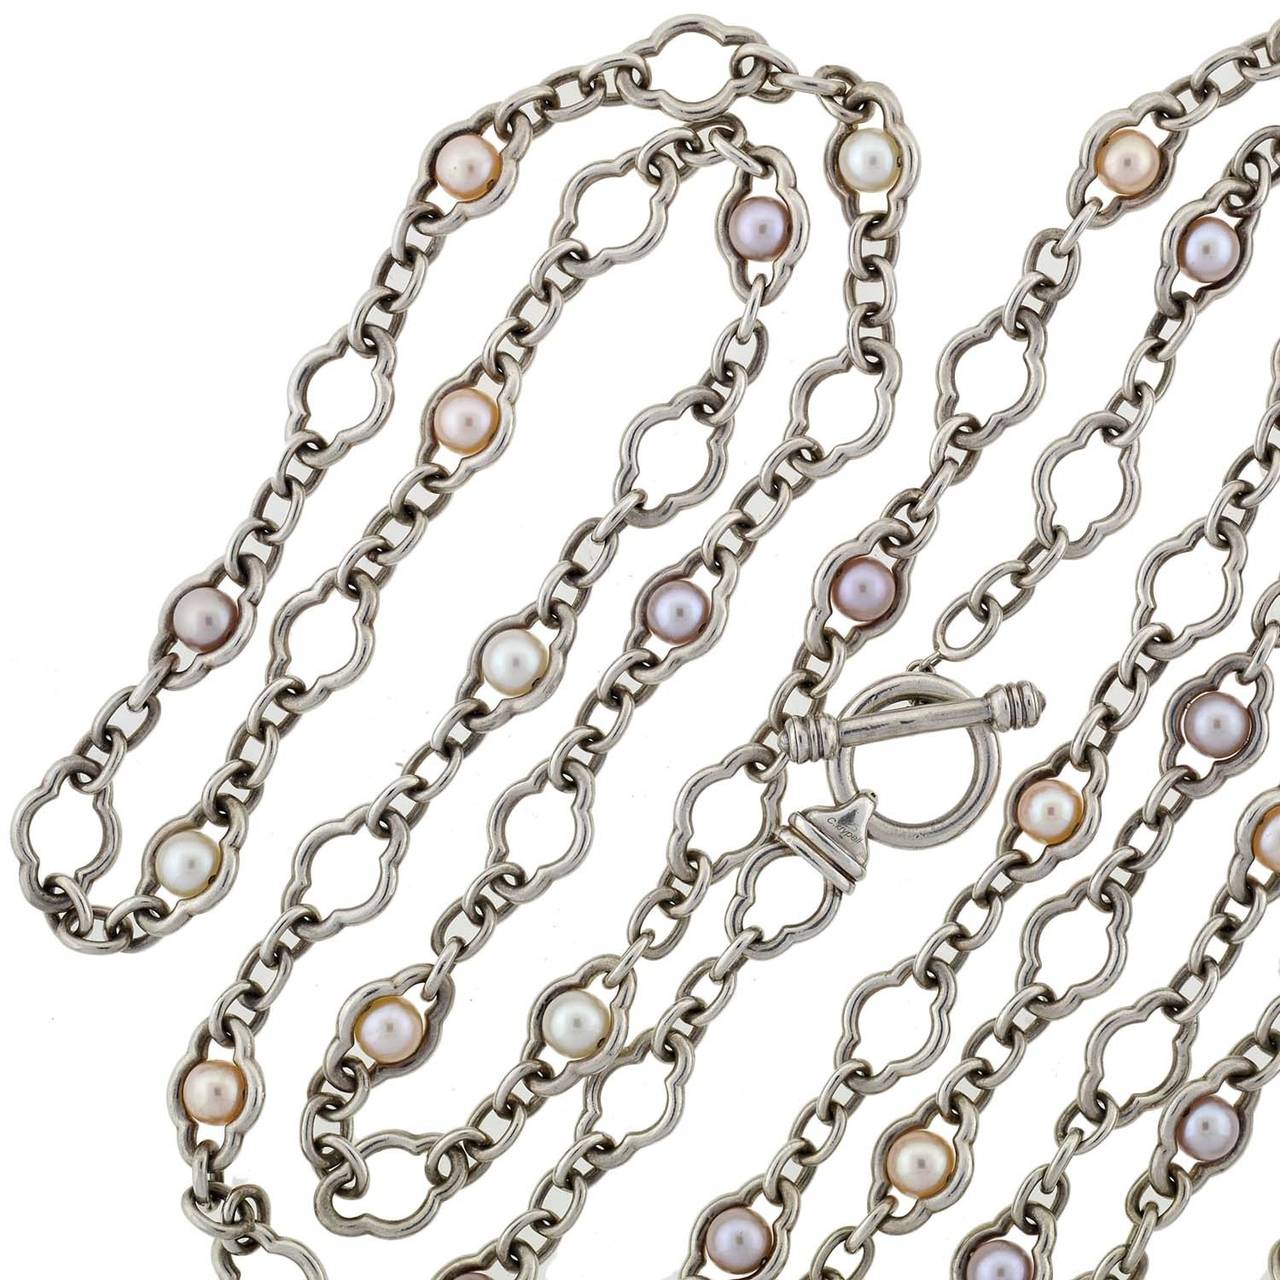 A fabulous pearl necklace from Charles Krypell! This stylish piece is extremely long in length and comprised of multicolored fresh water cultured pearls which are set within a heavy sterling chain. The chain has simple oval rings which alternate